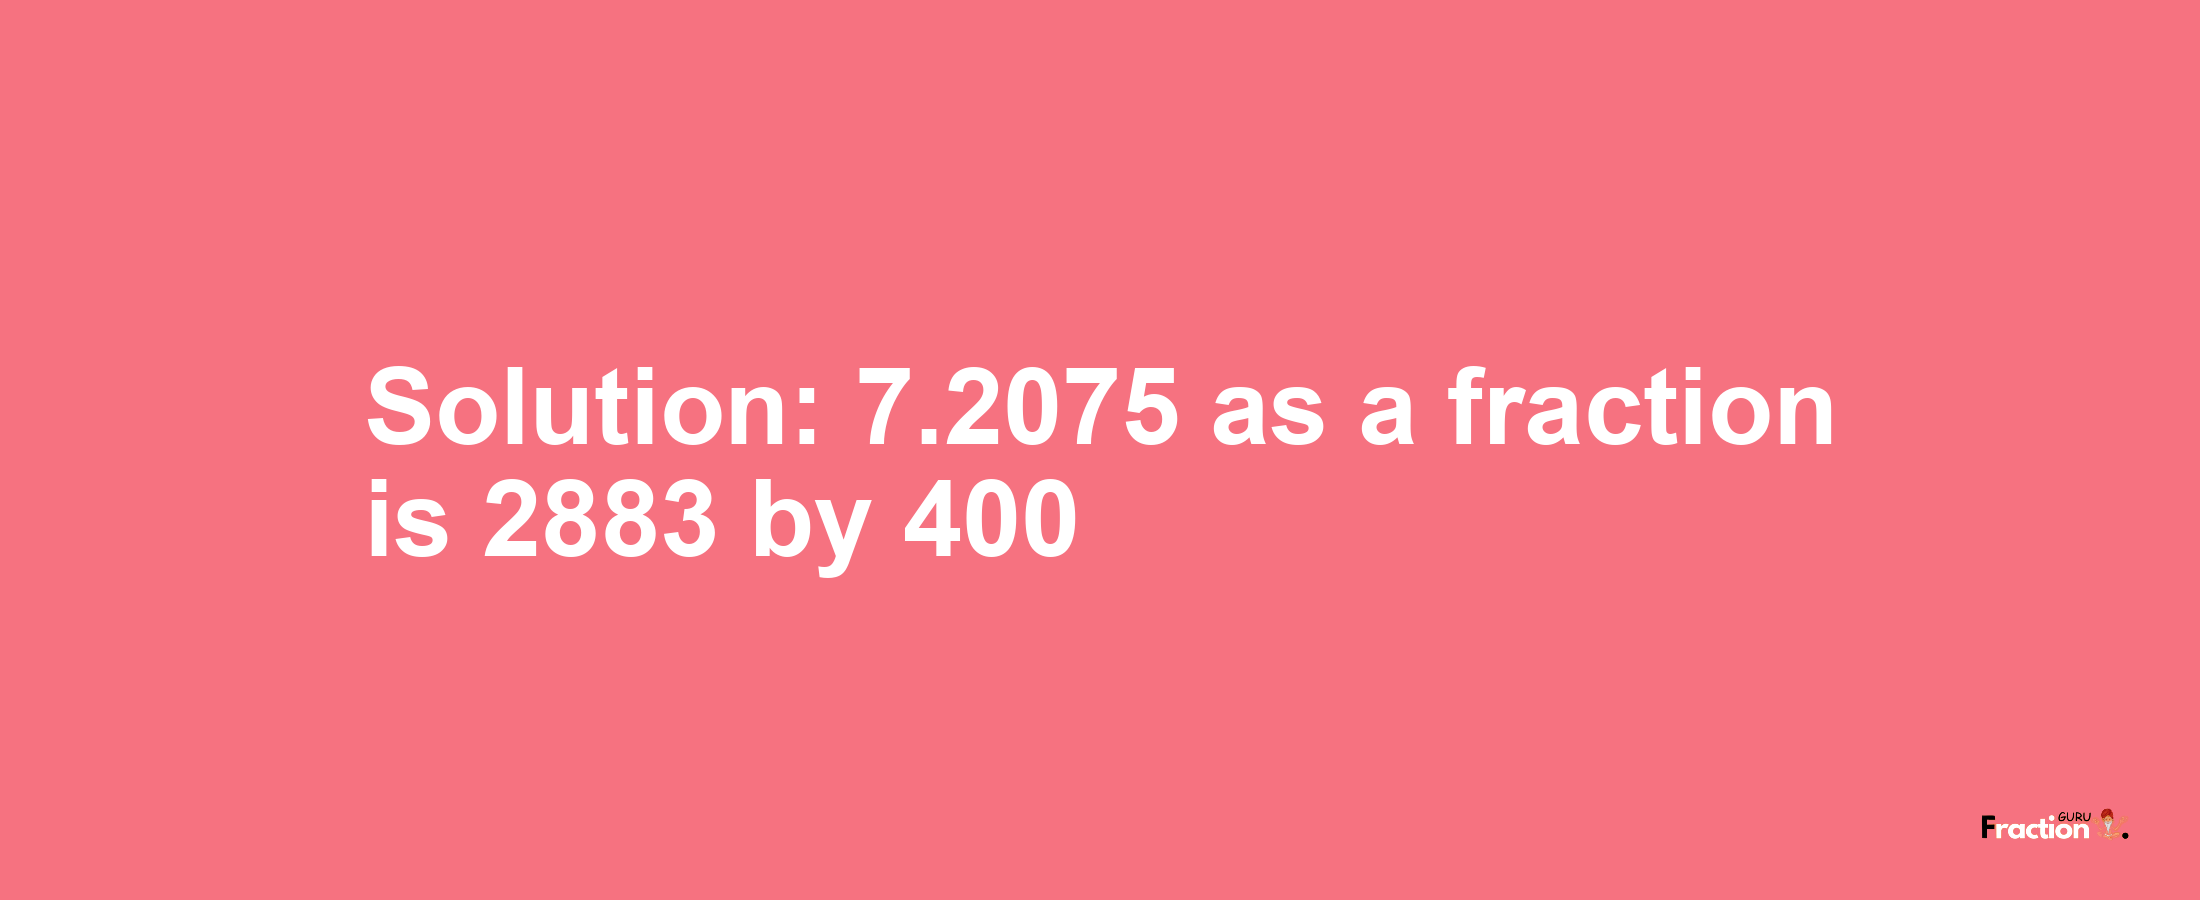 Solution:7.2075 as a fraction is 2883/400